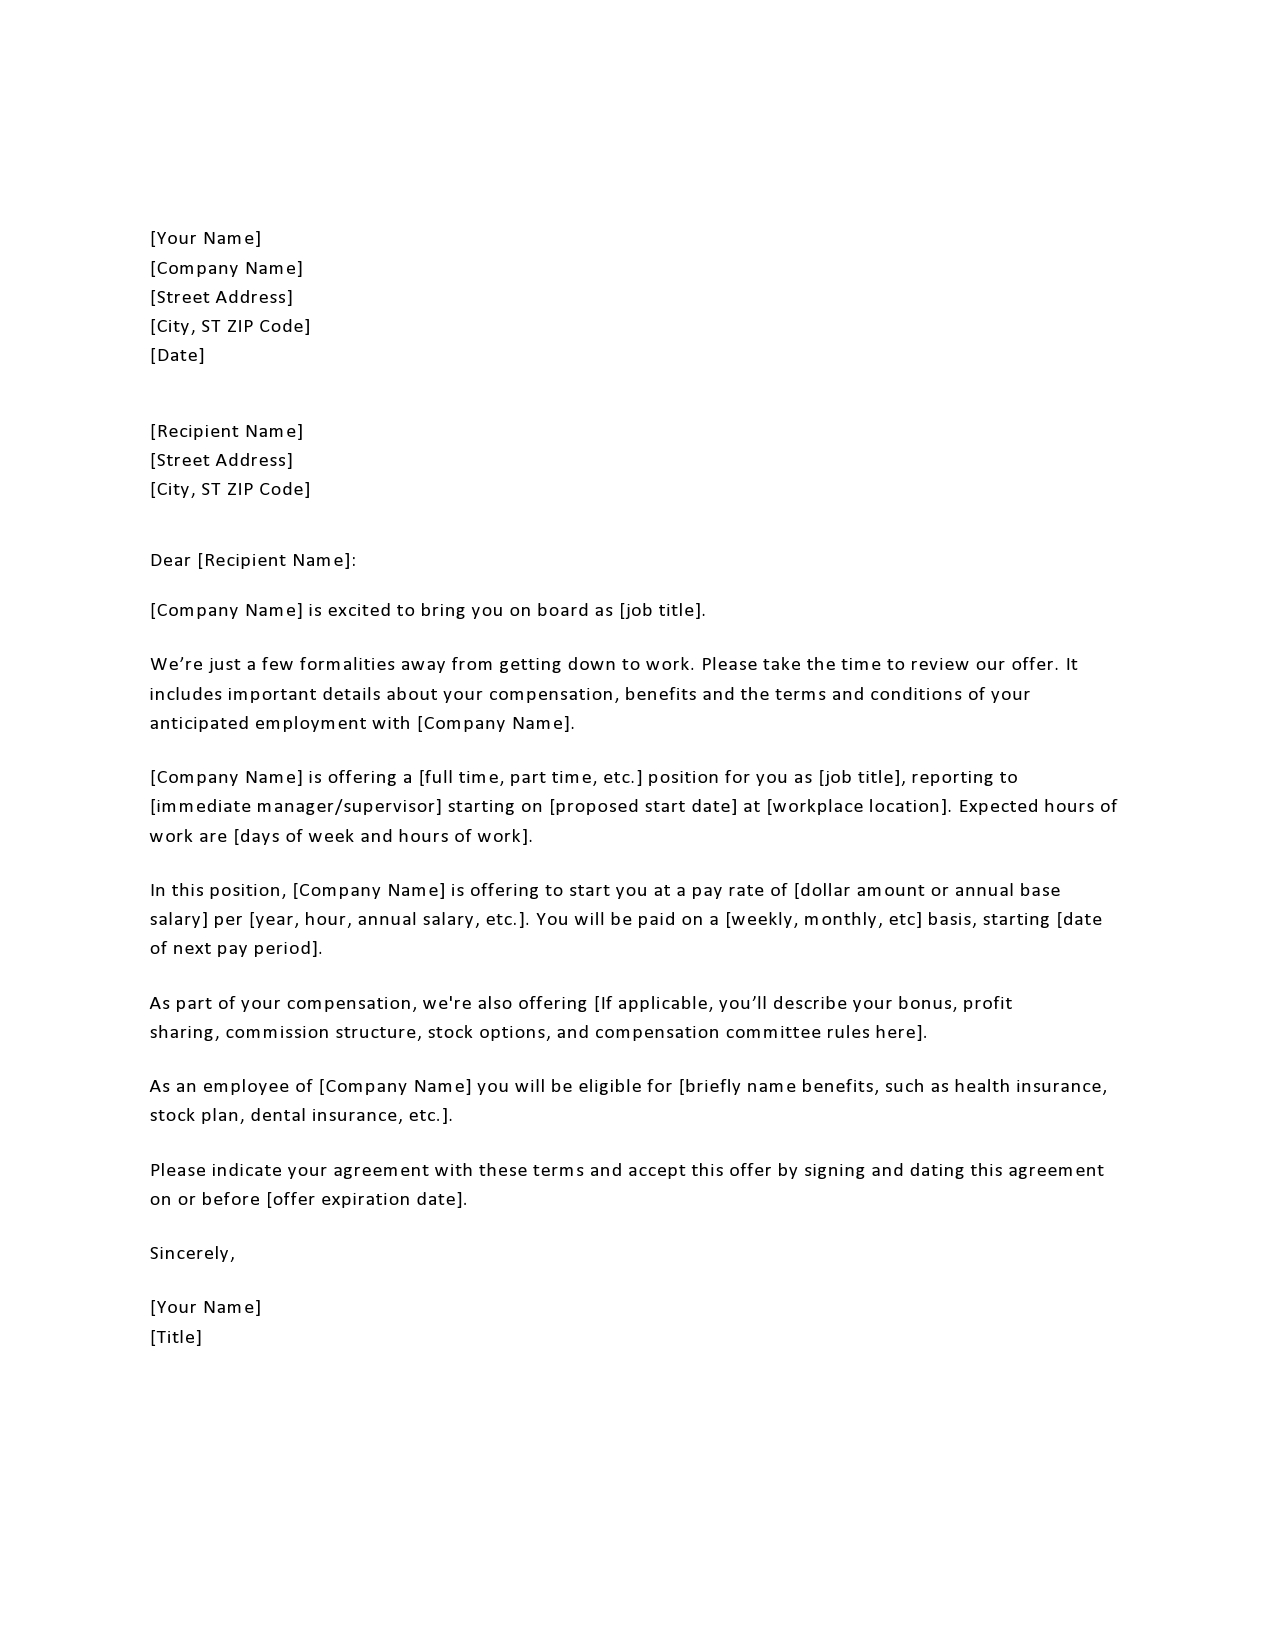 Free employment offer letter template 05